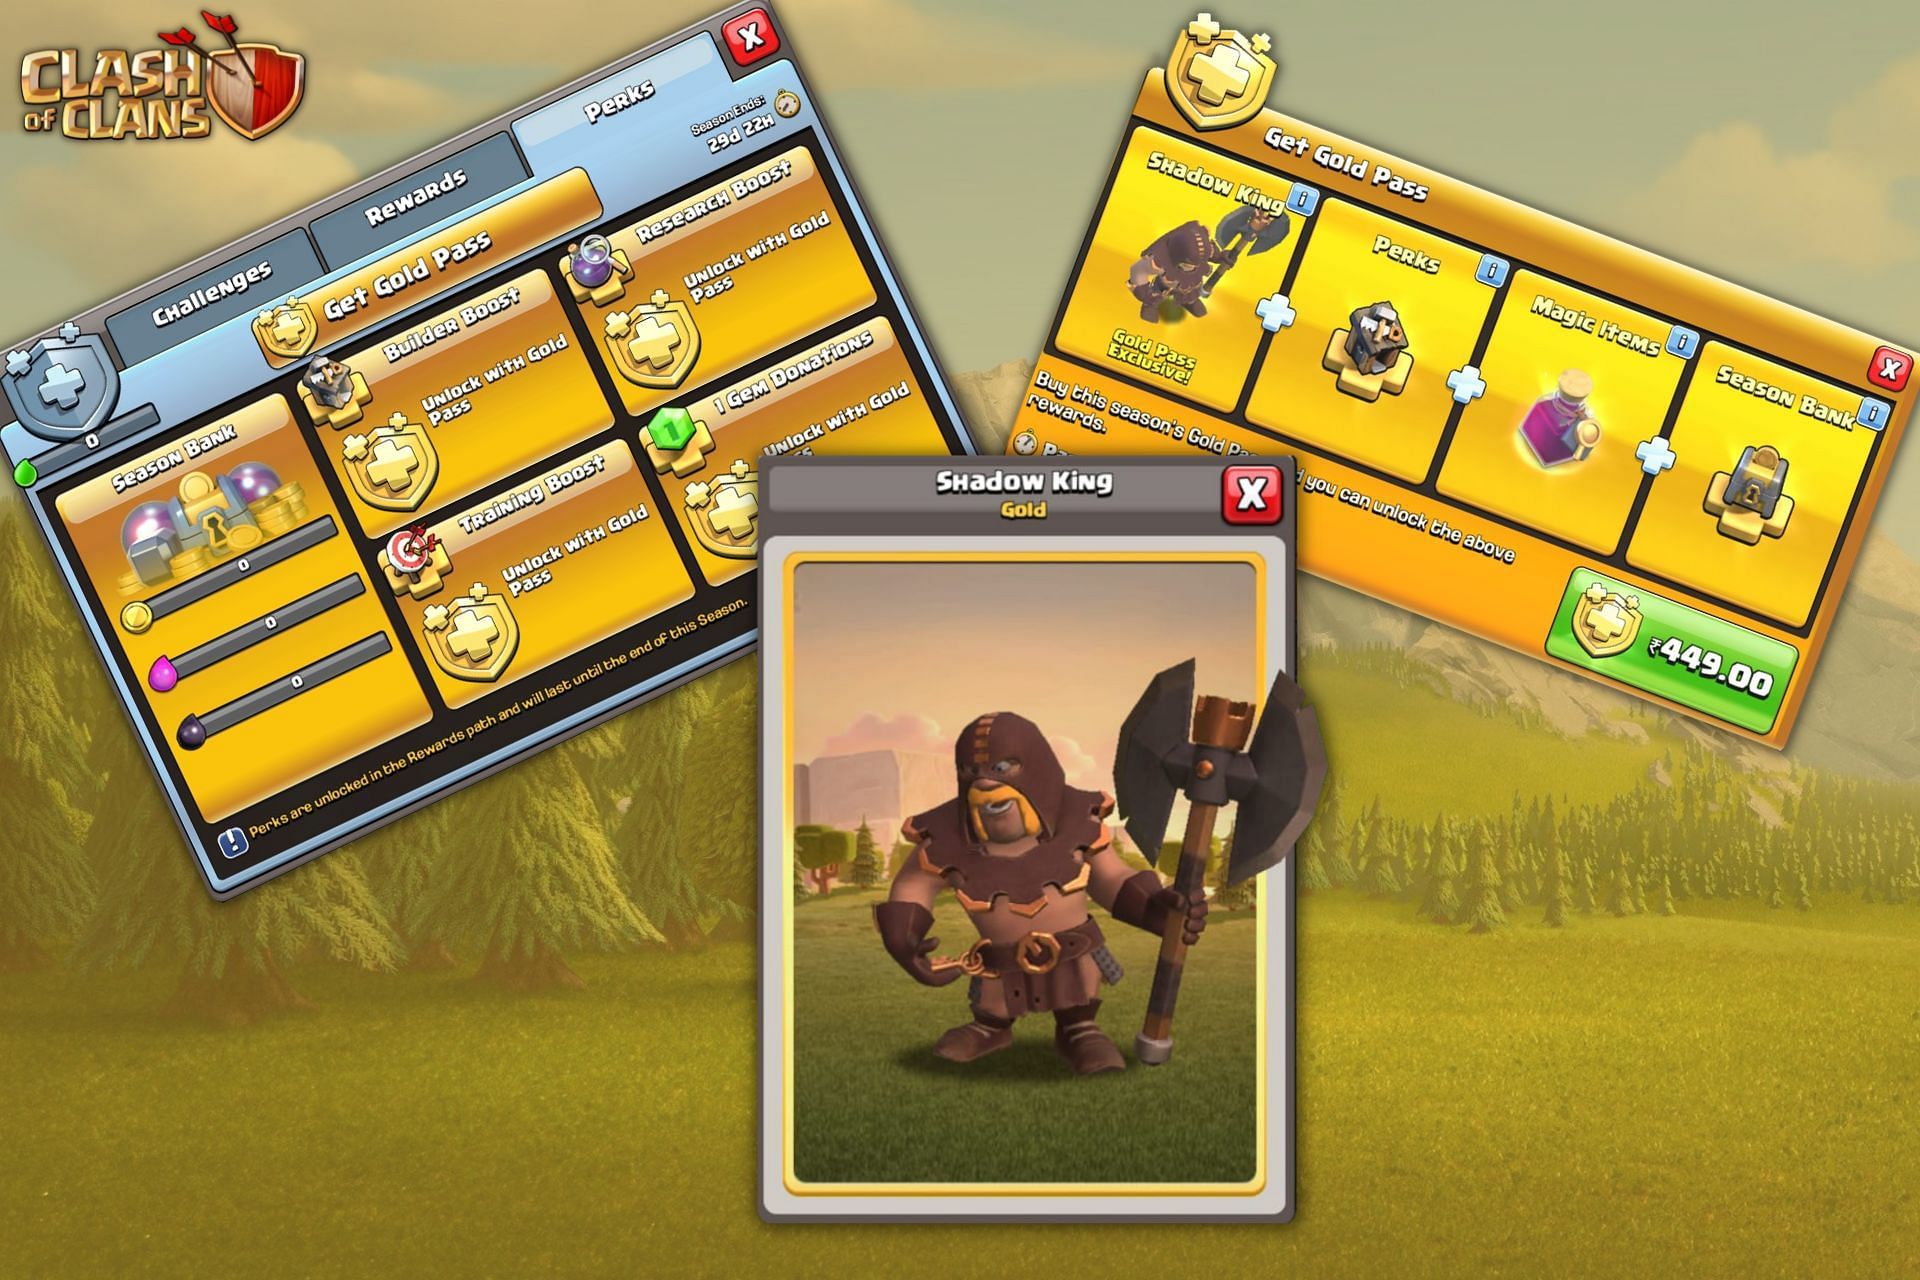 April Gold Pass in Clash of Clans Rewards and More